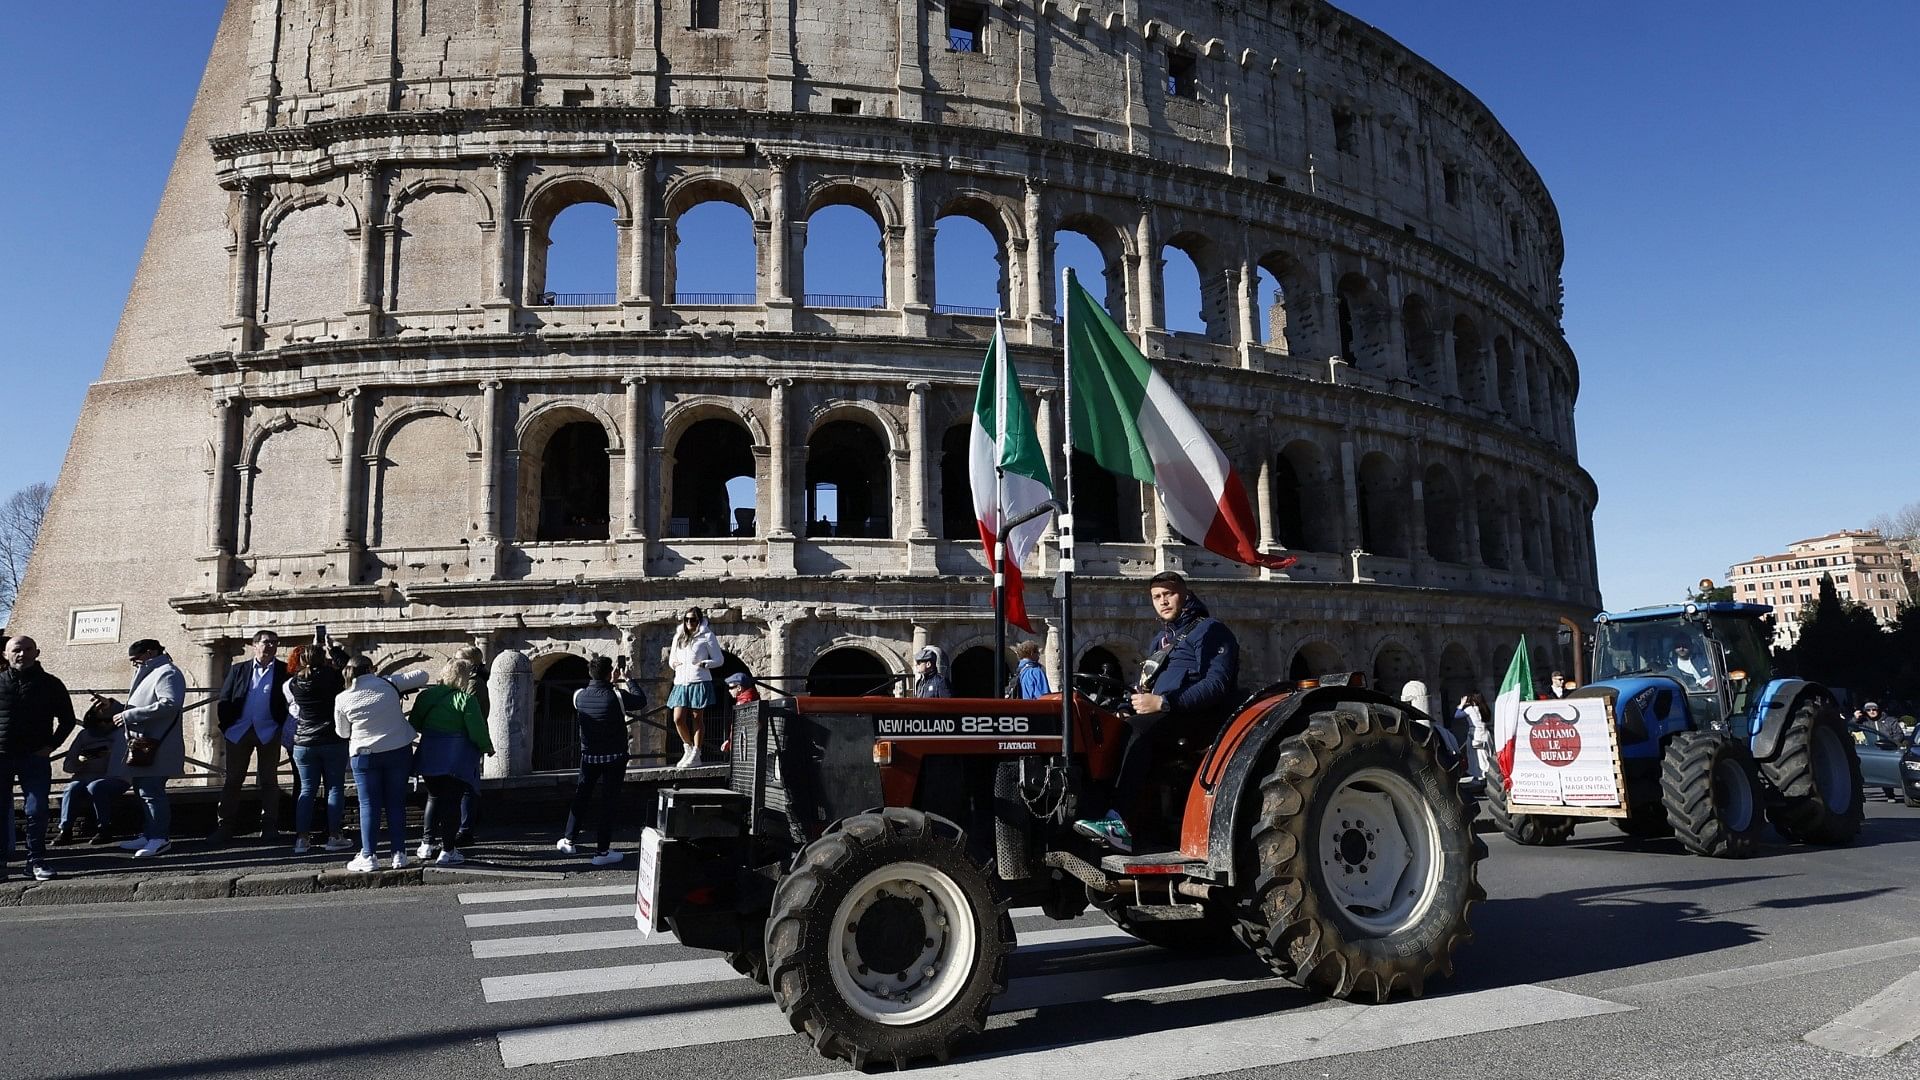 <div class="paragraphs"><p>Tractors passes in front of the Coliseum as farmers protest continues in Rome, Italy.</p></div>